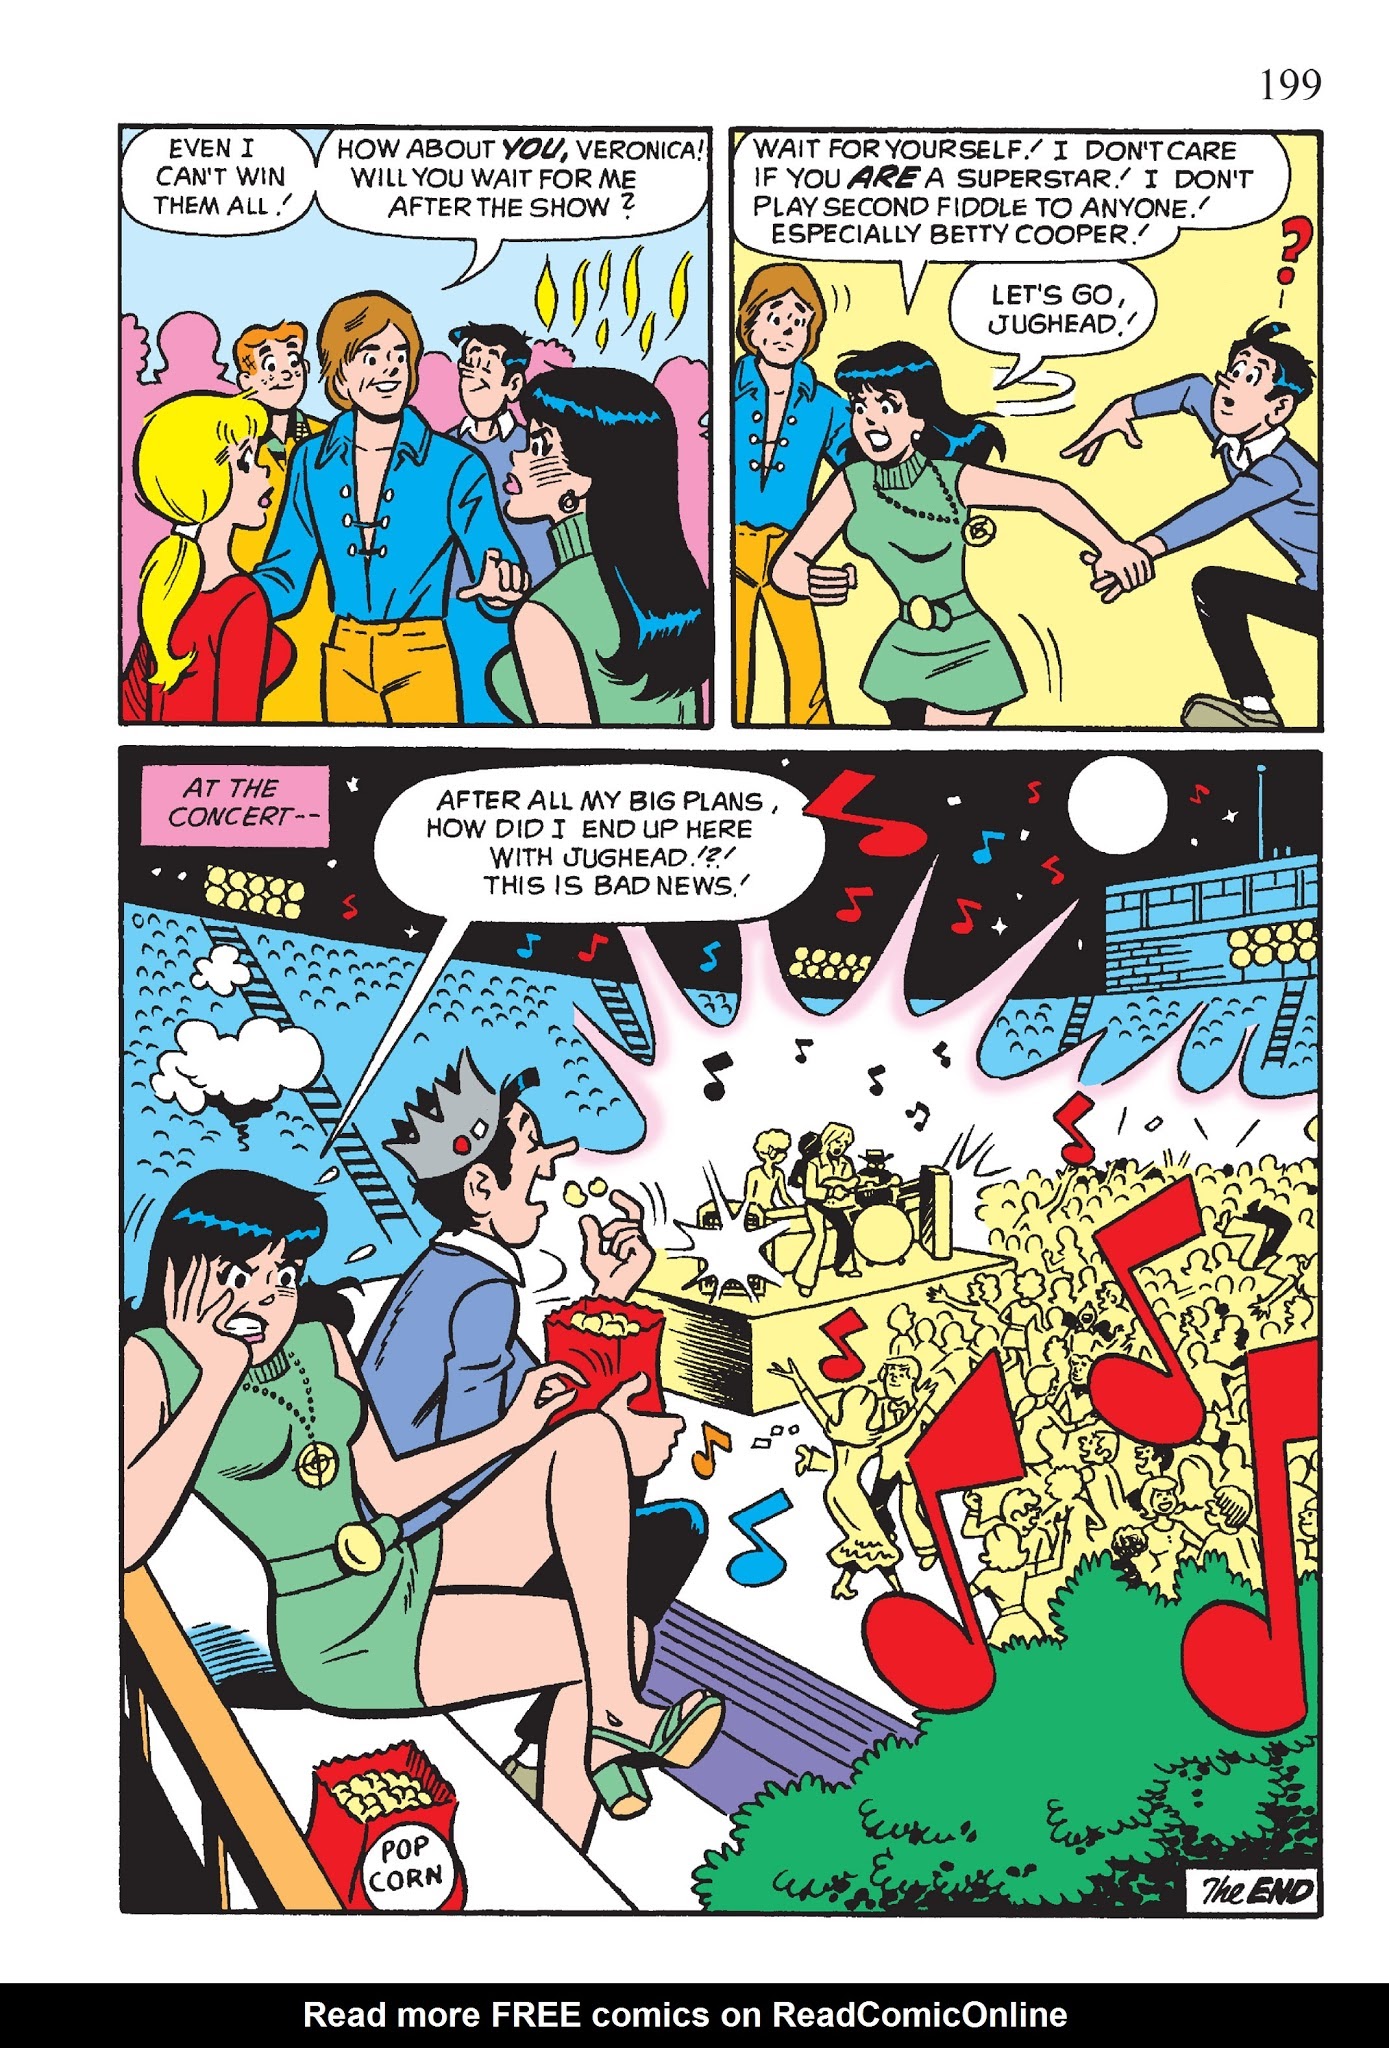 The Best Of Archie Comics Betty Veronica Tpb 1 Part 3 | Read The Best Of Archie  Comics Betty Veronica Tpb 1 Part 3 comic online in high quality. Read Full  Comic